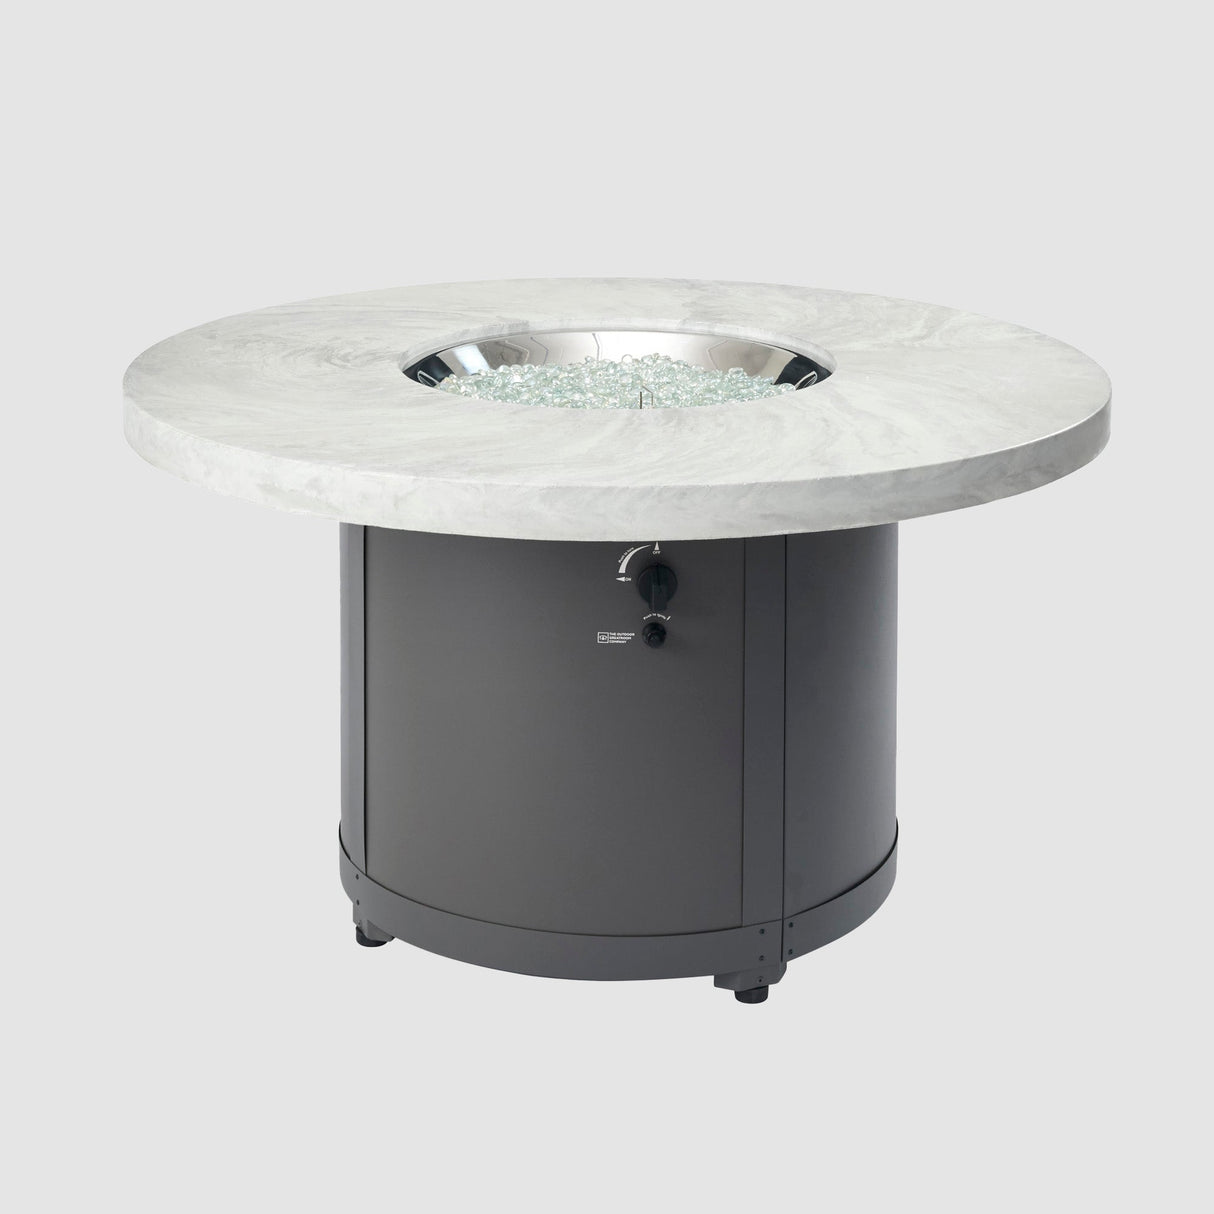 The White Onyx Beacon Round Gas Fire Pit Table with no cover on